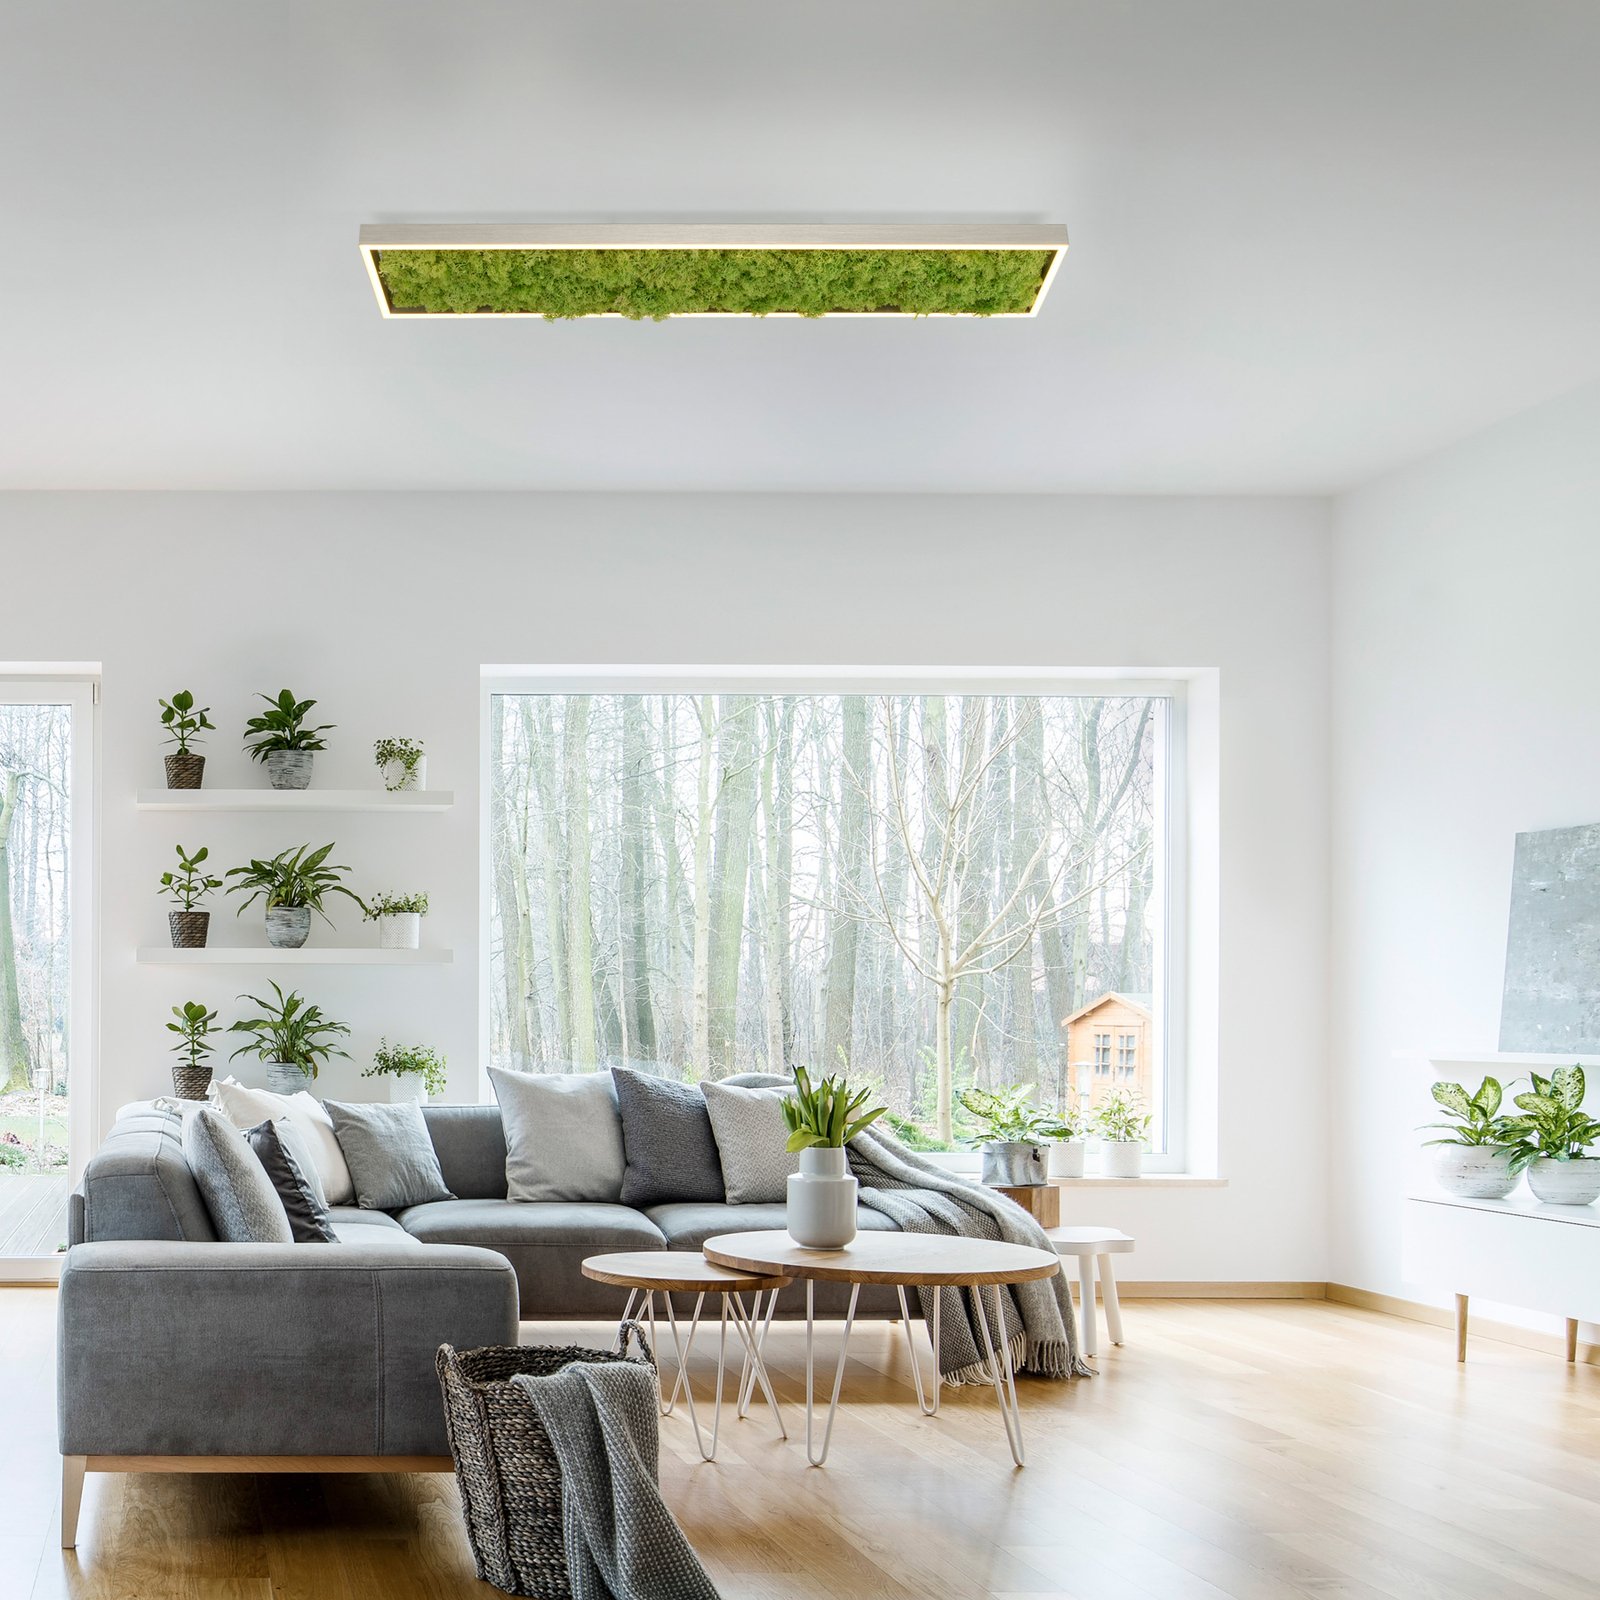 Green Knut LED ceiling light with real moss